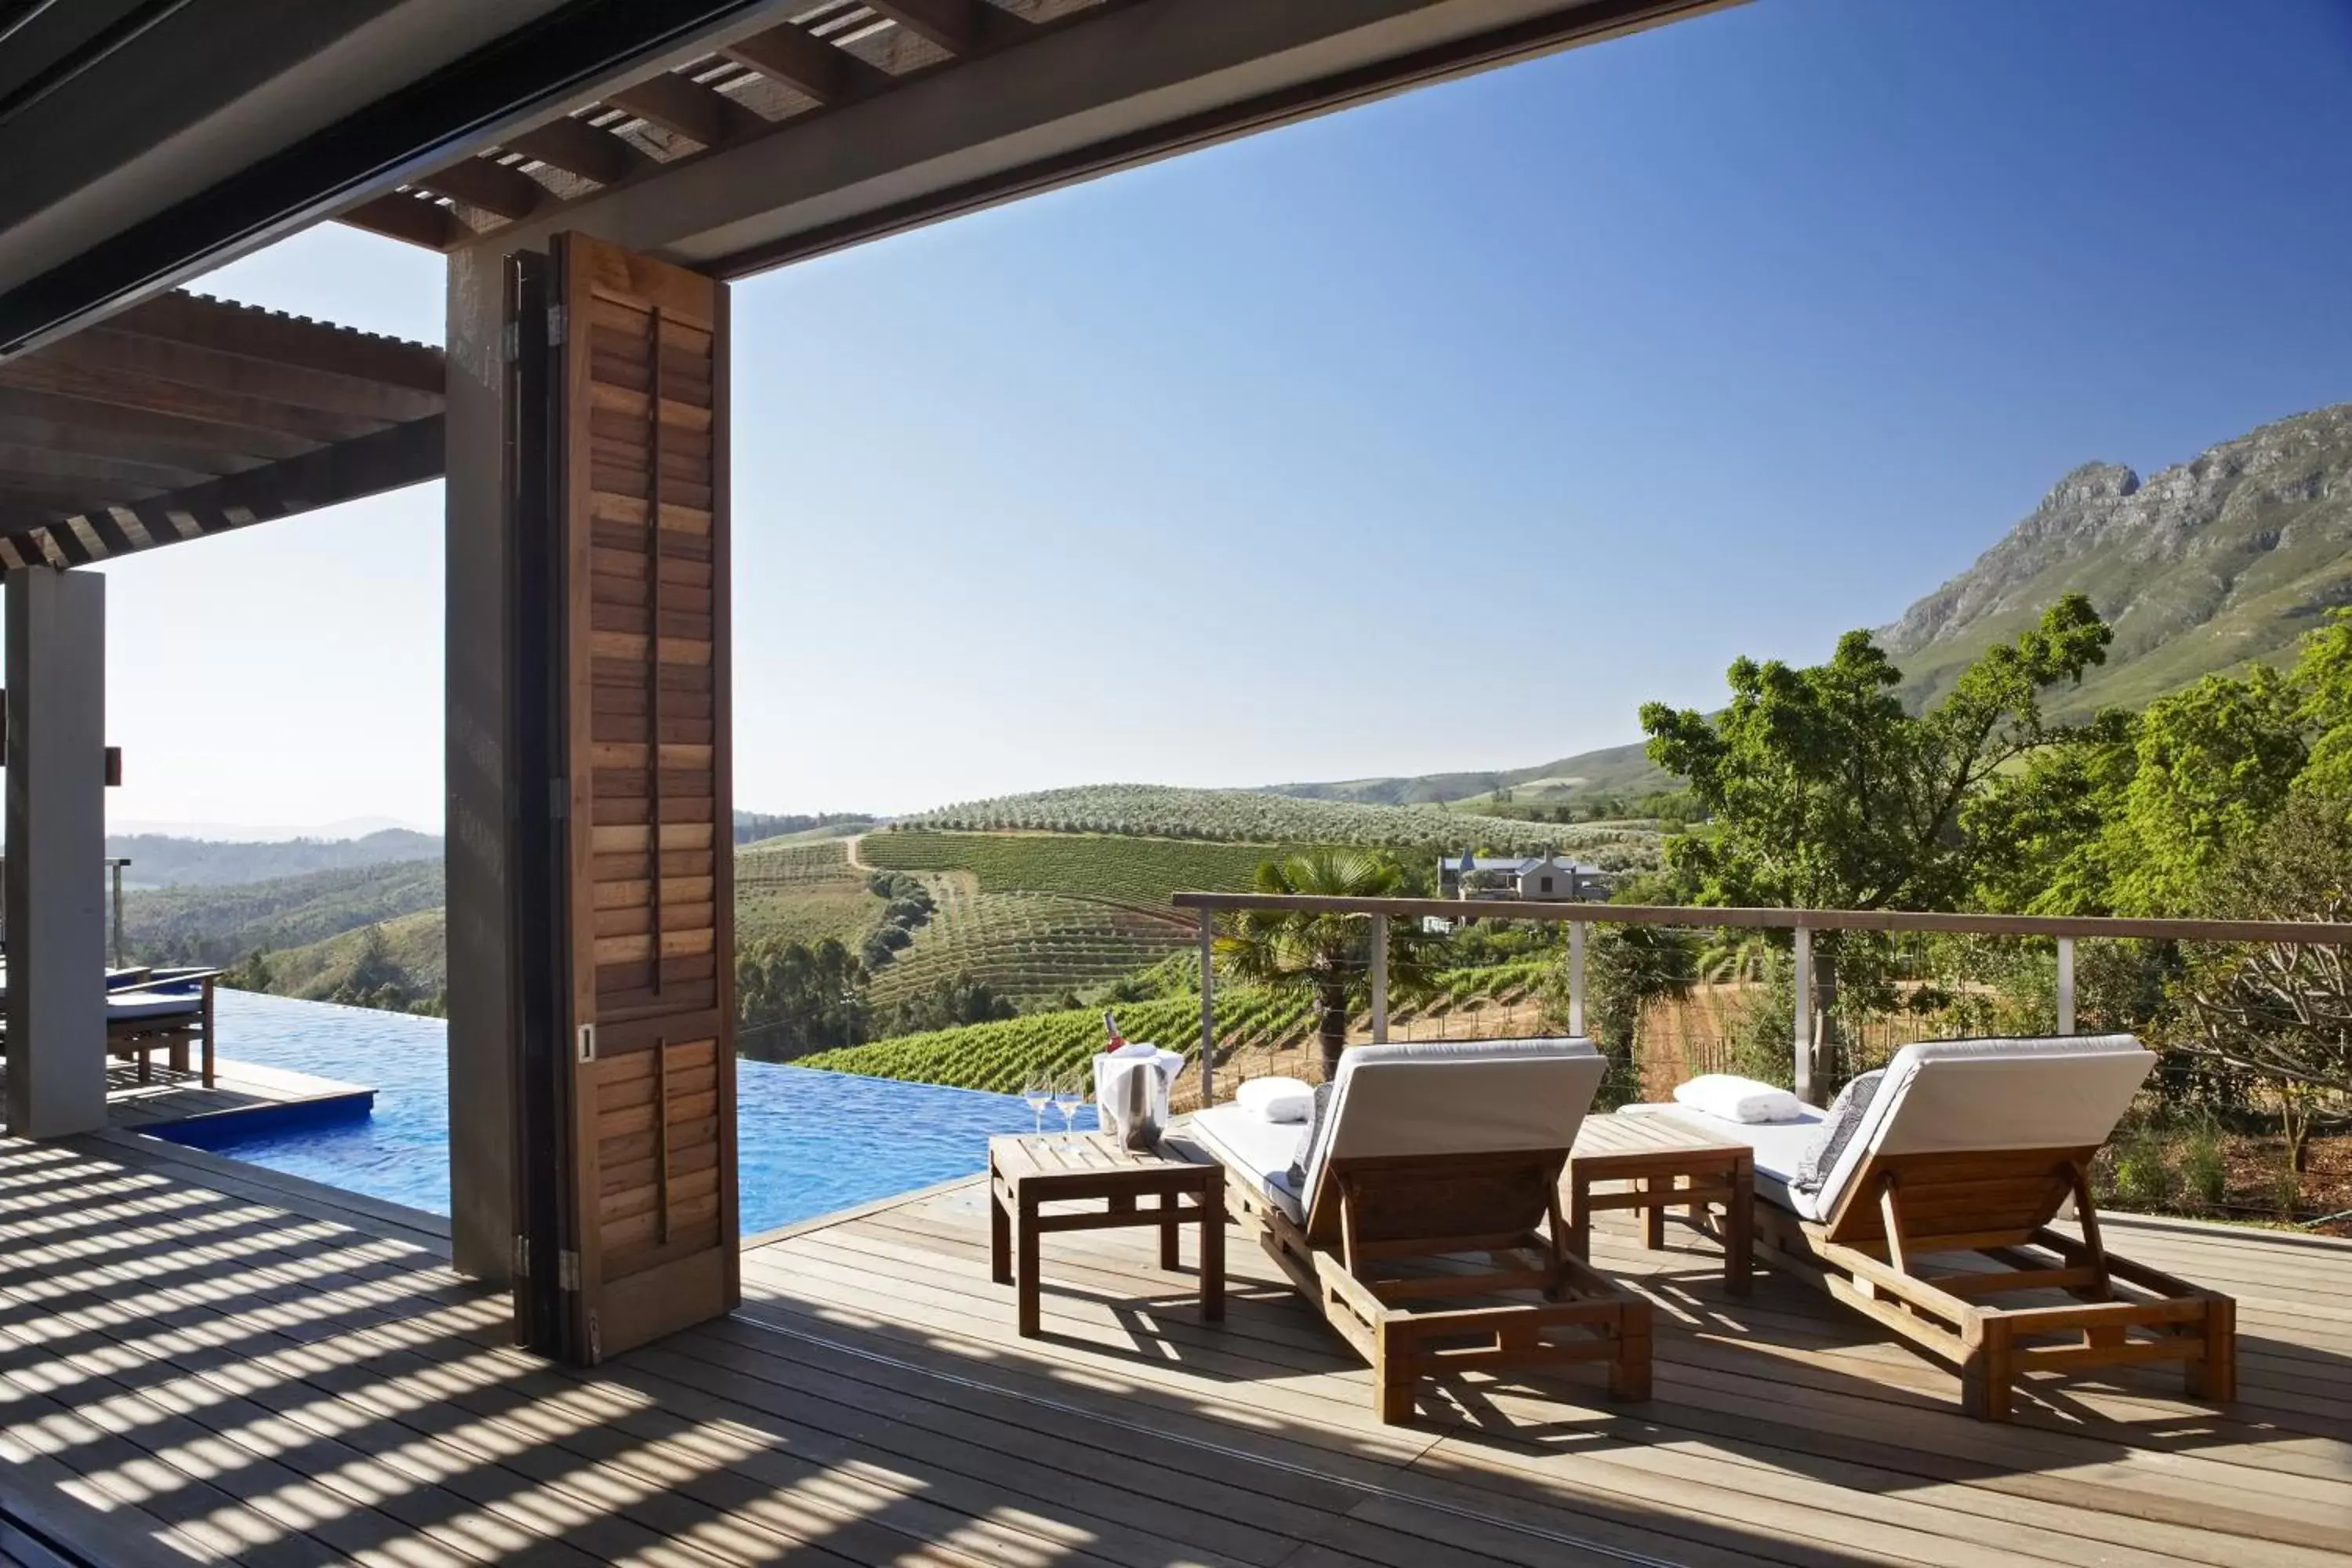 Patio, Swimming Pool in Delaire Graff Lodges and Spa